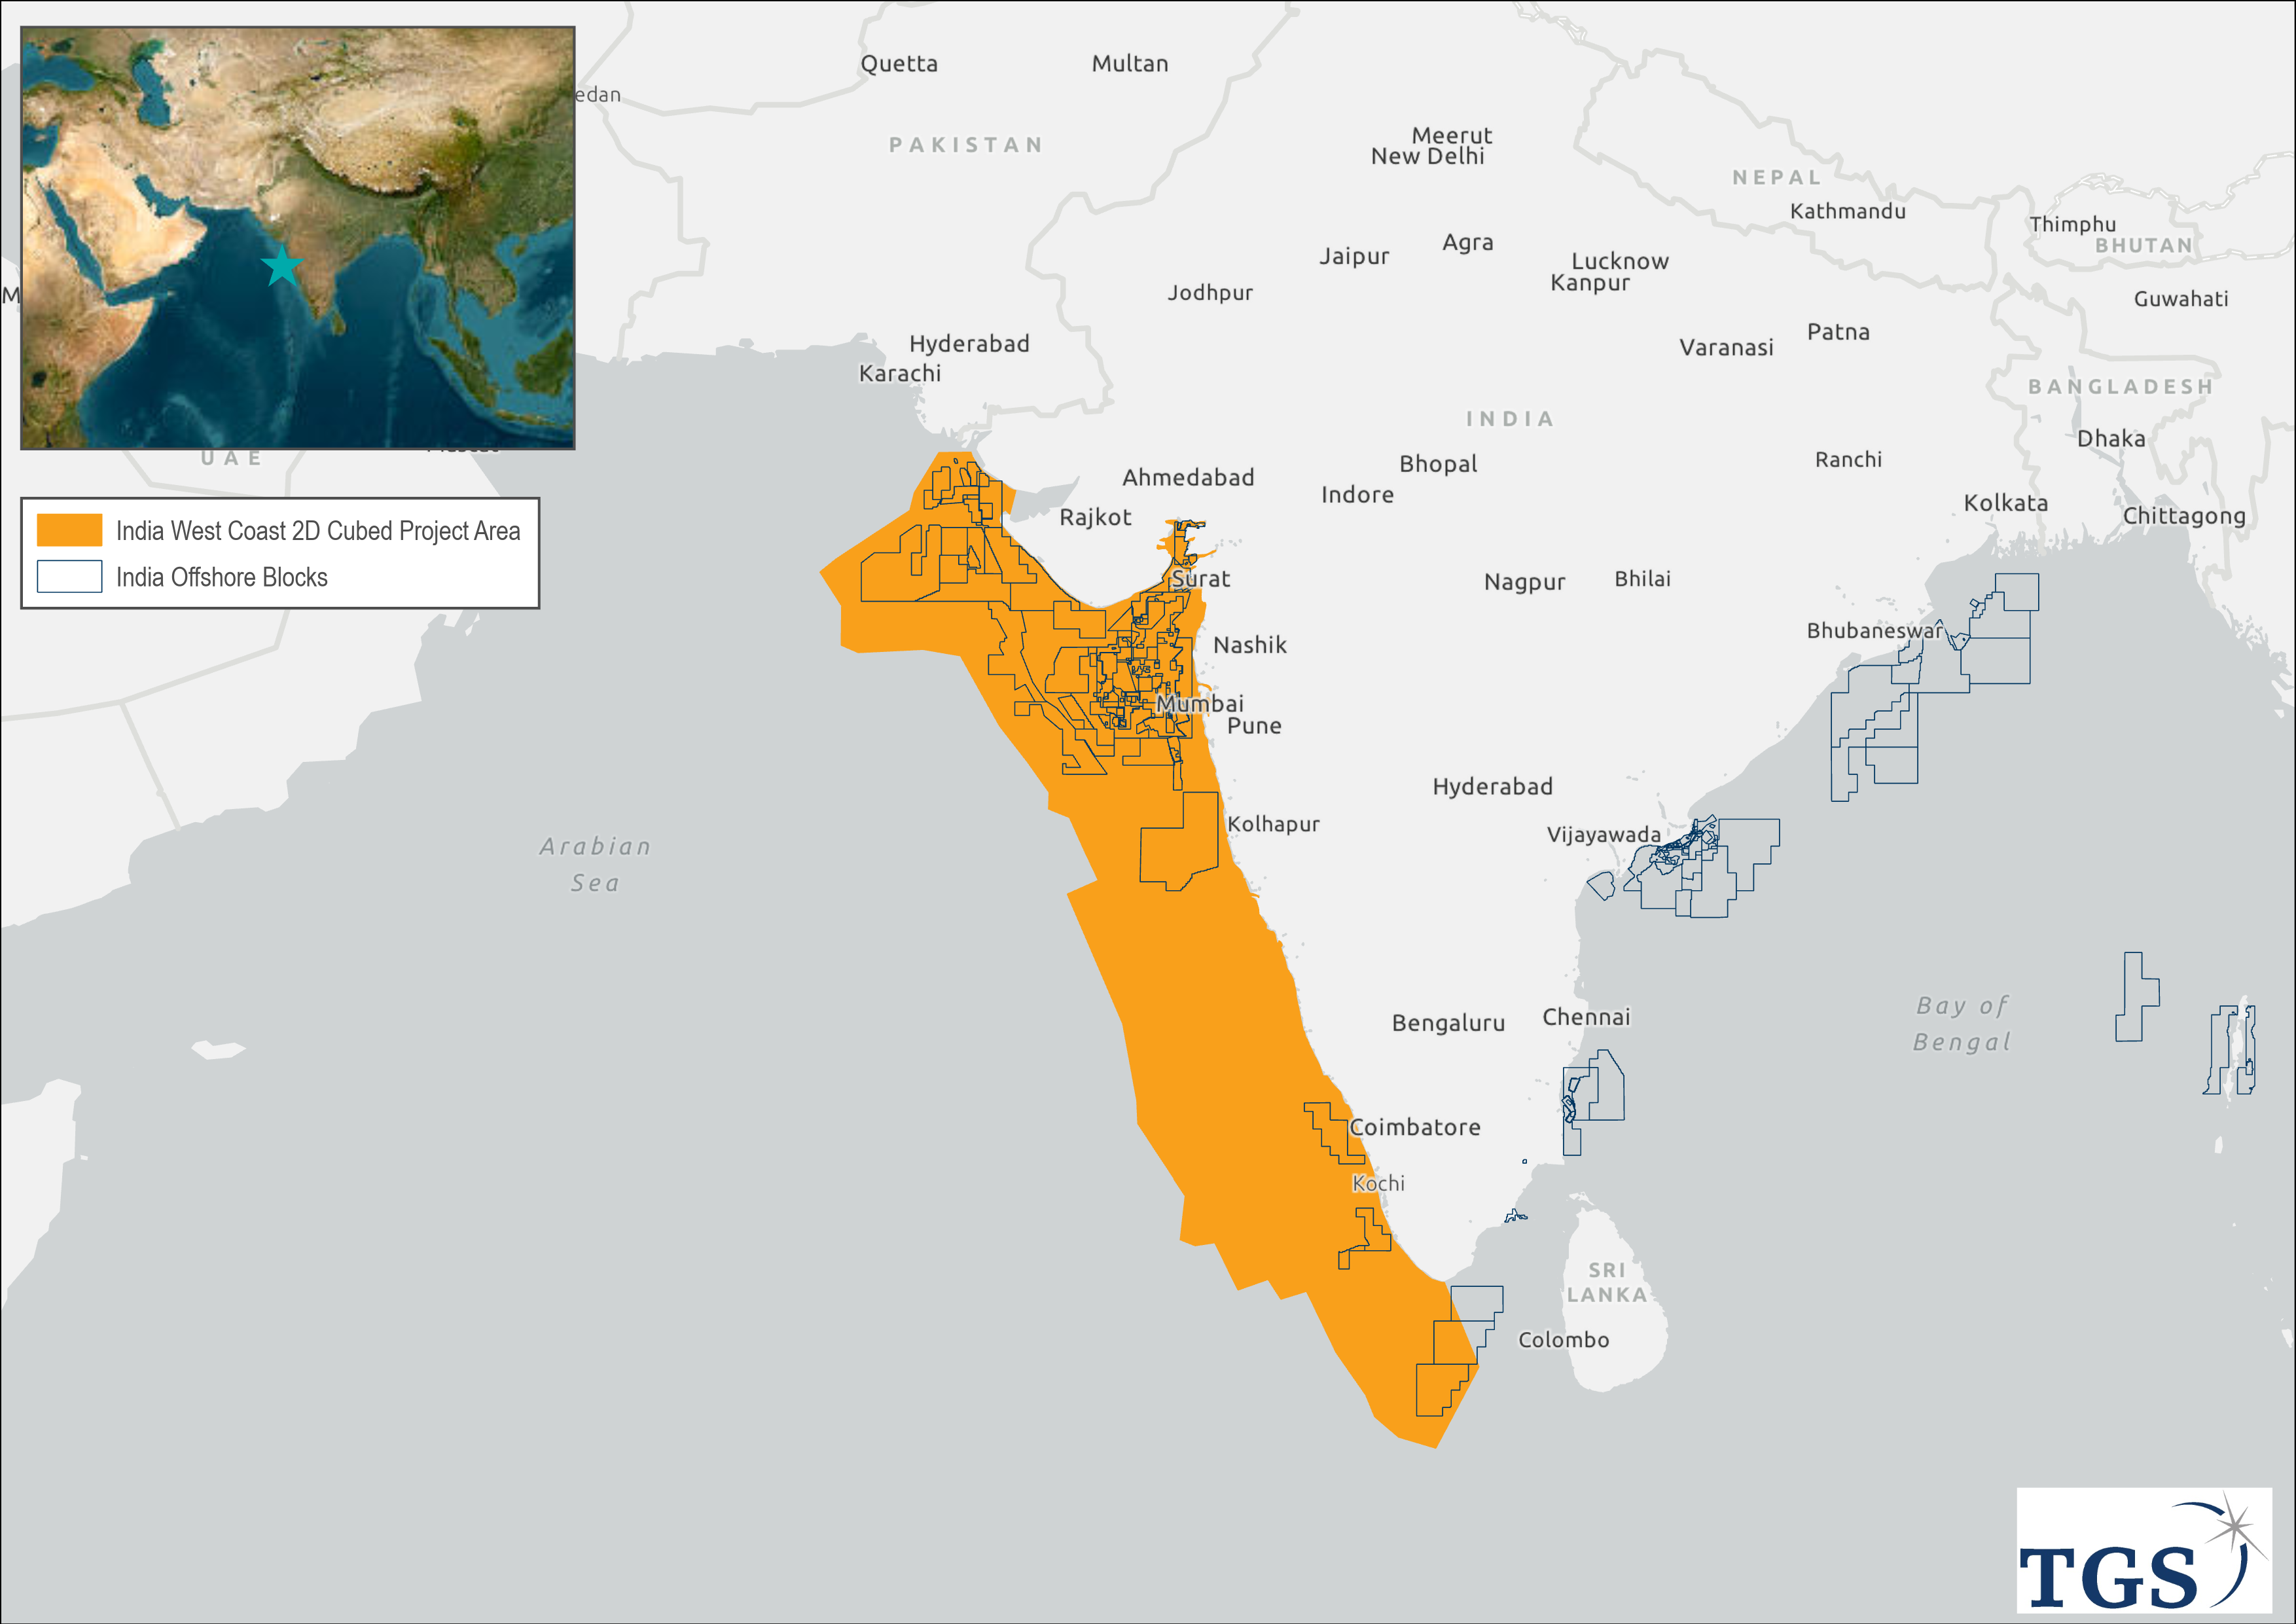 TGS Announces Extensive 2D-cubed Seismic Project in West Coast India